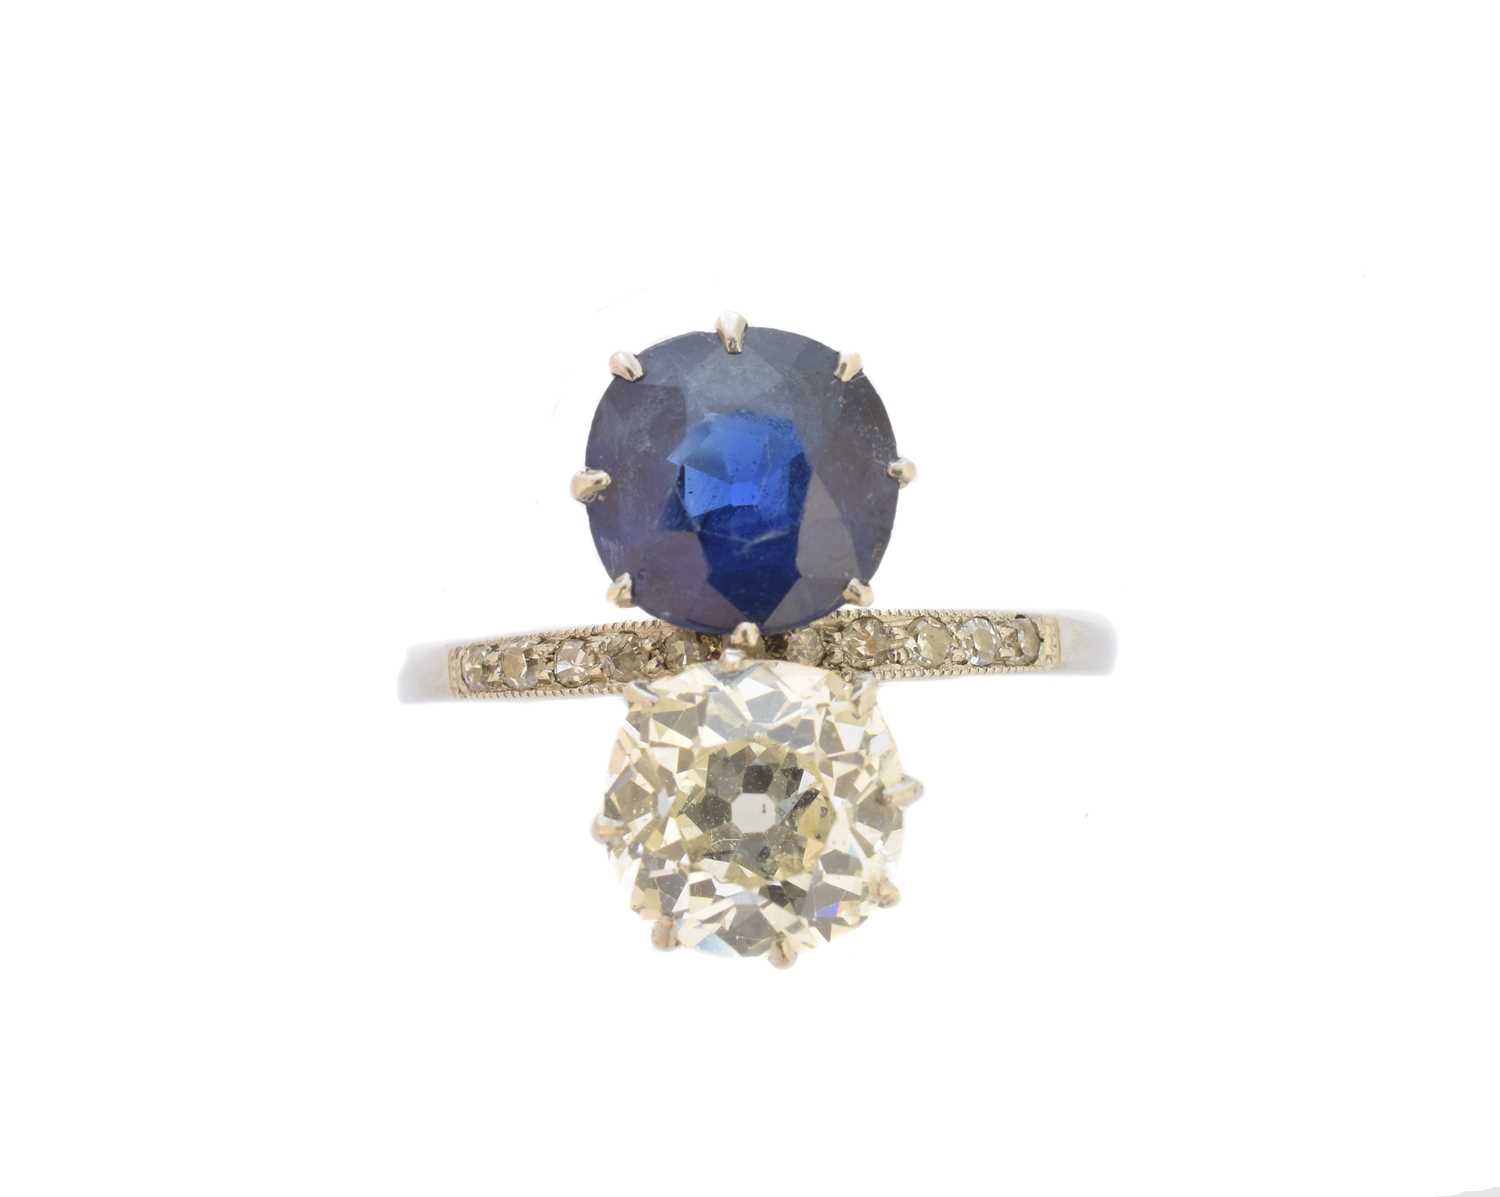 Lot 184 - An early 20th century diamond and Basaltic sapphire toi et moi ring